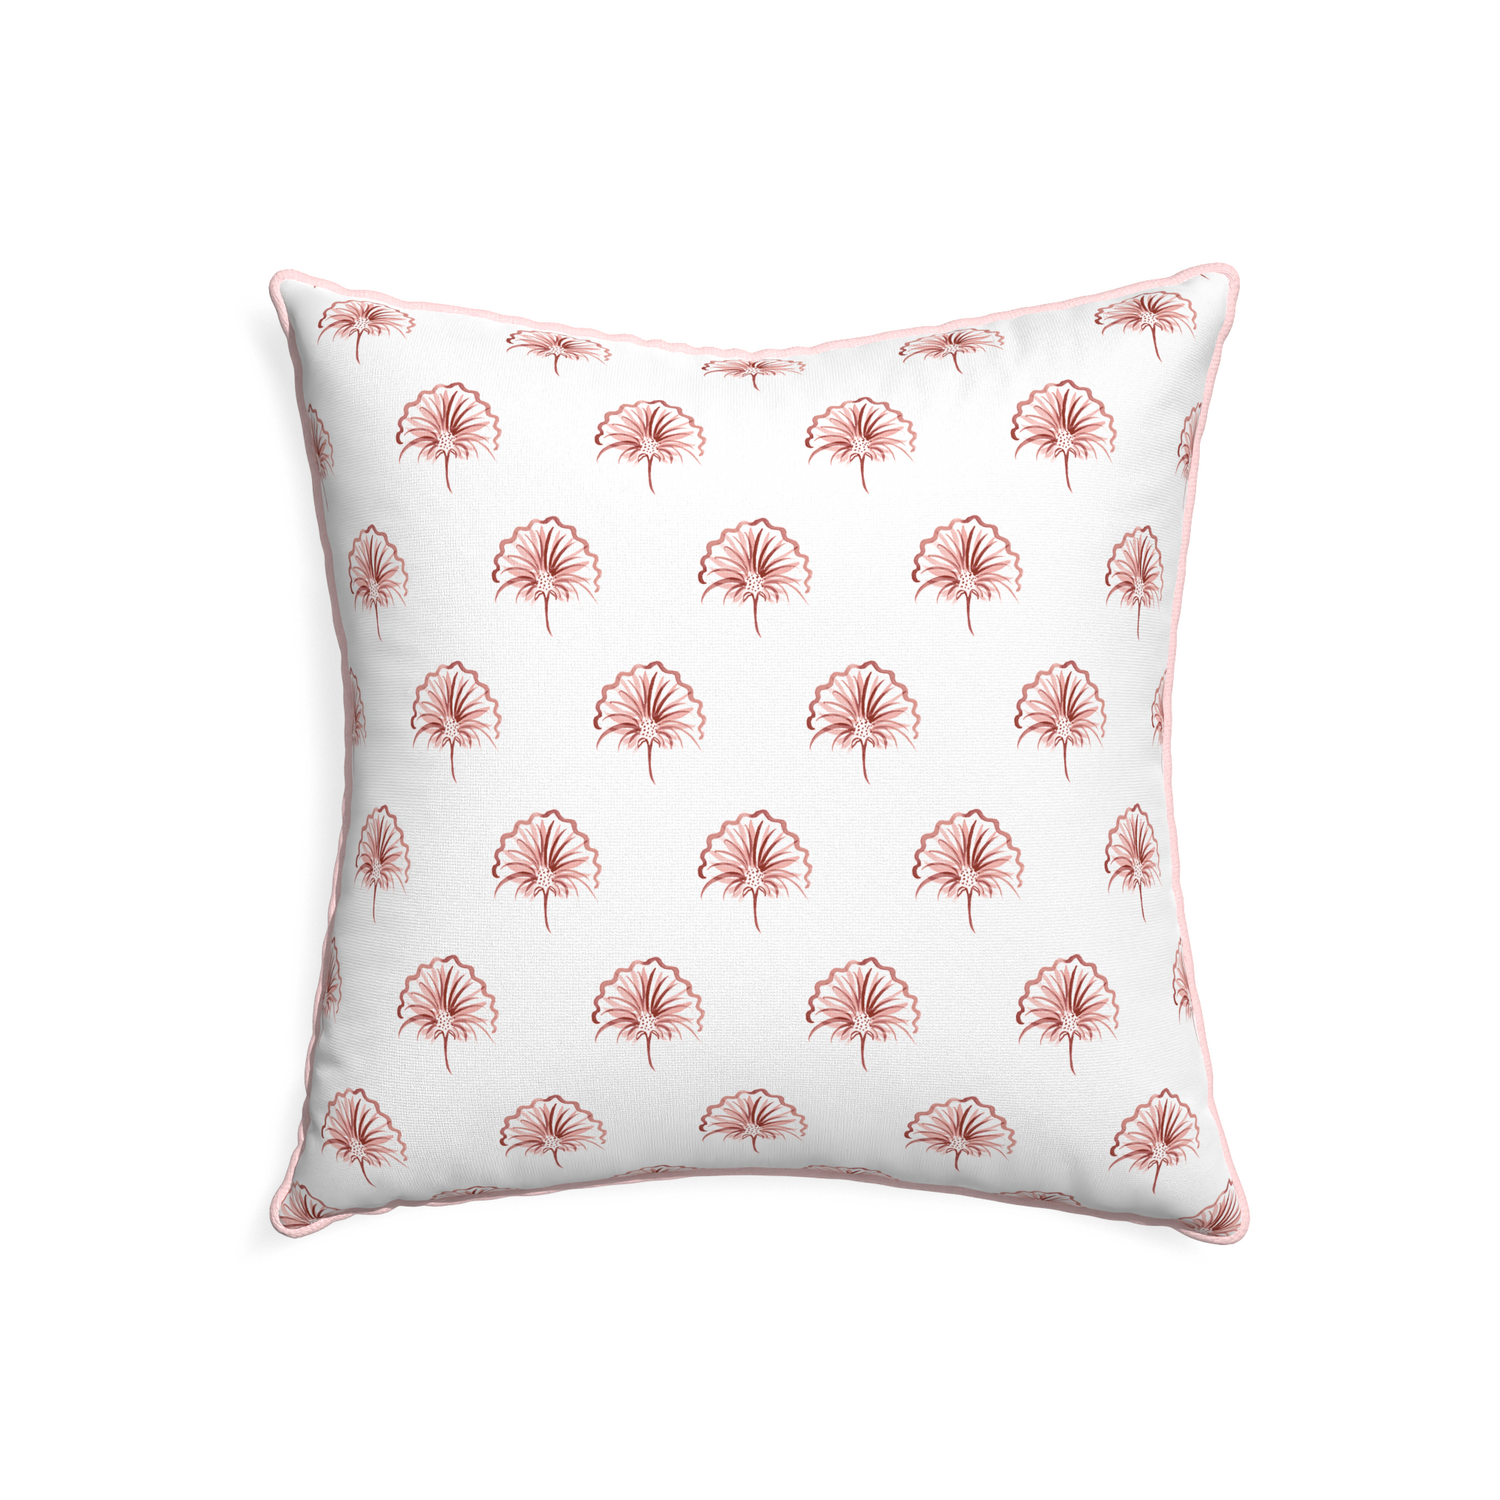 22-square penelope rose custom floral pinkpillow with petal piping on white background